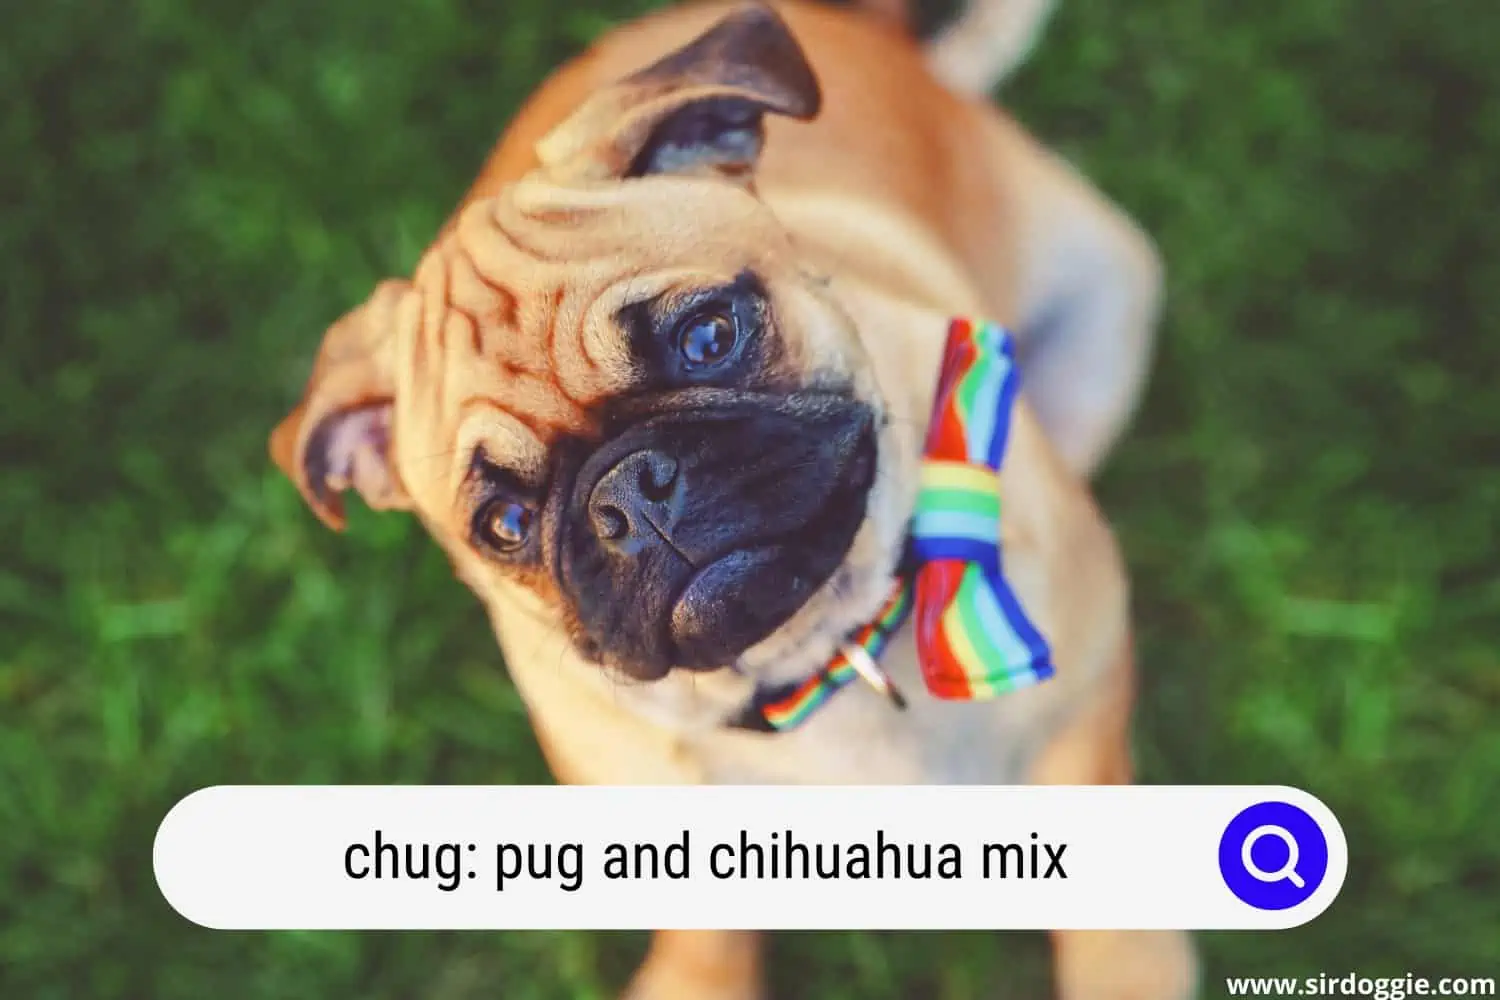 what is a pug and chihuahua mix called